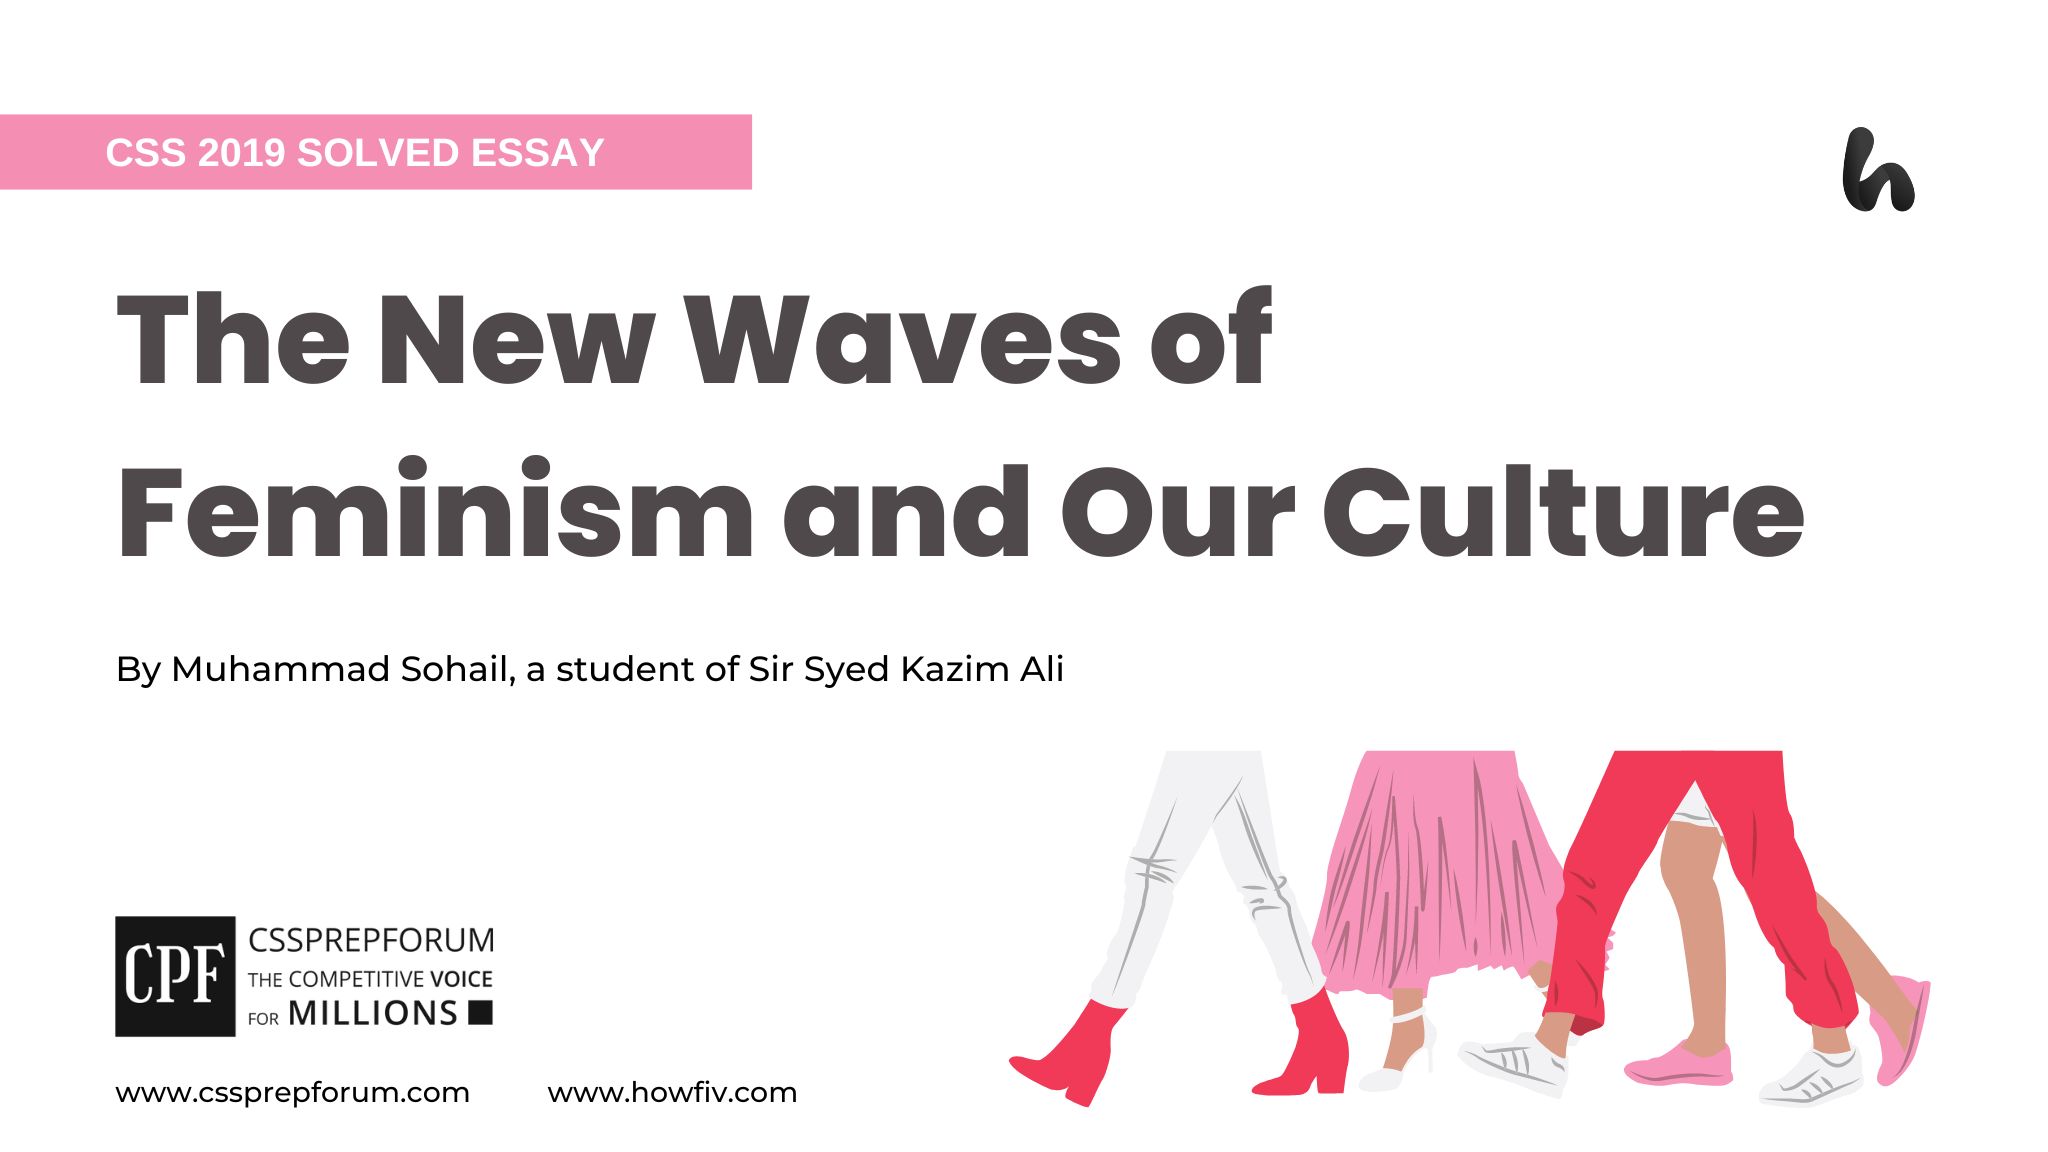 The New Waves of Feminism and Our Culture by Muhammad Sohail